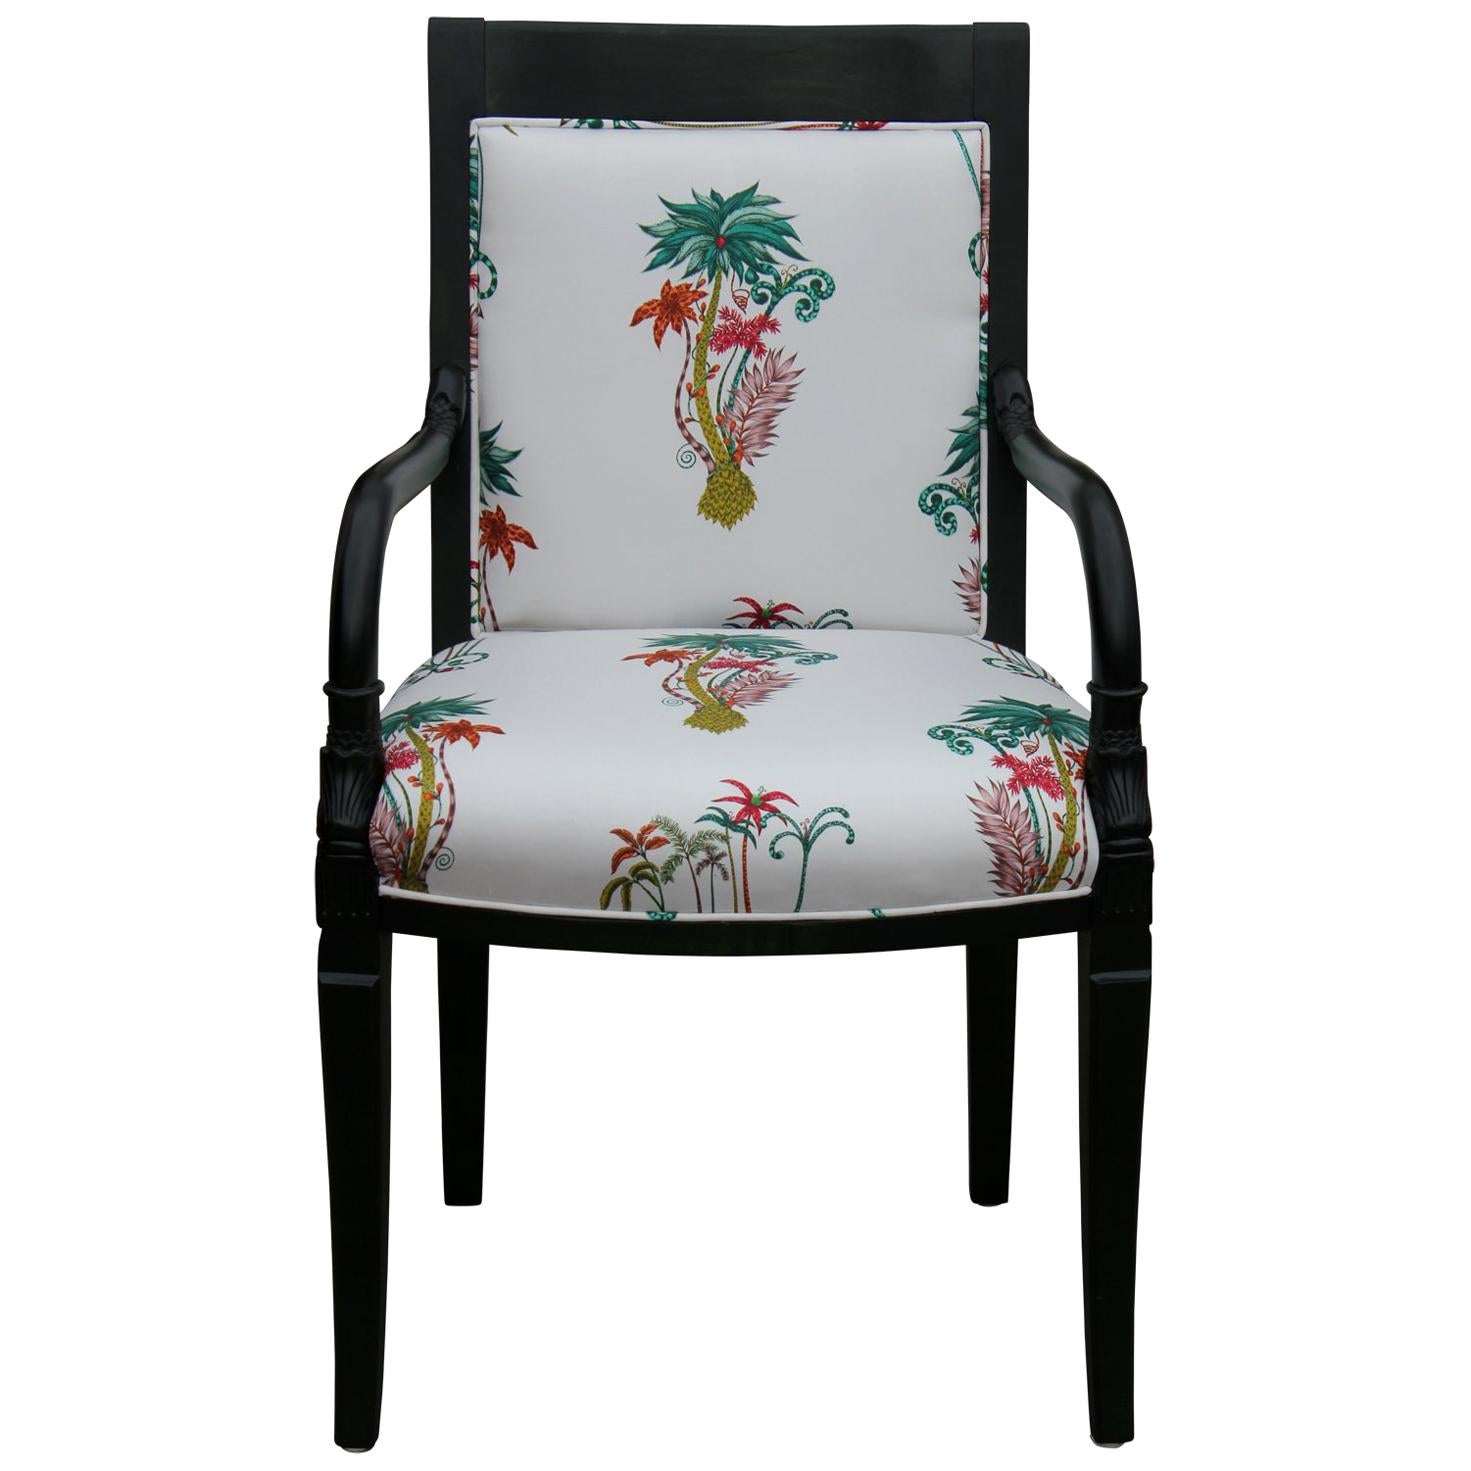 Custom Green Dyed French Armchair with Tropical Palm Tree Upholstery